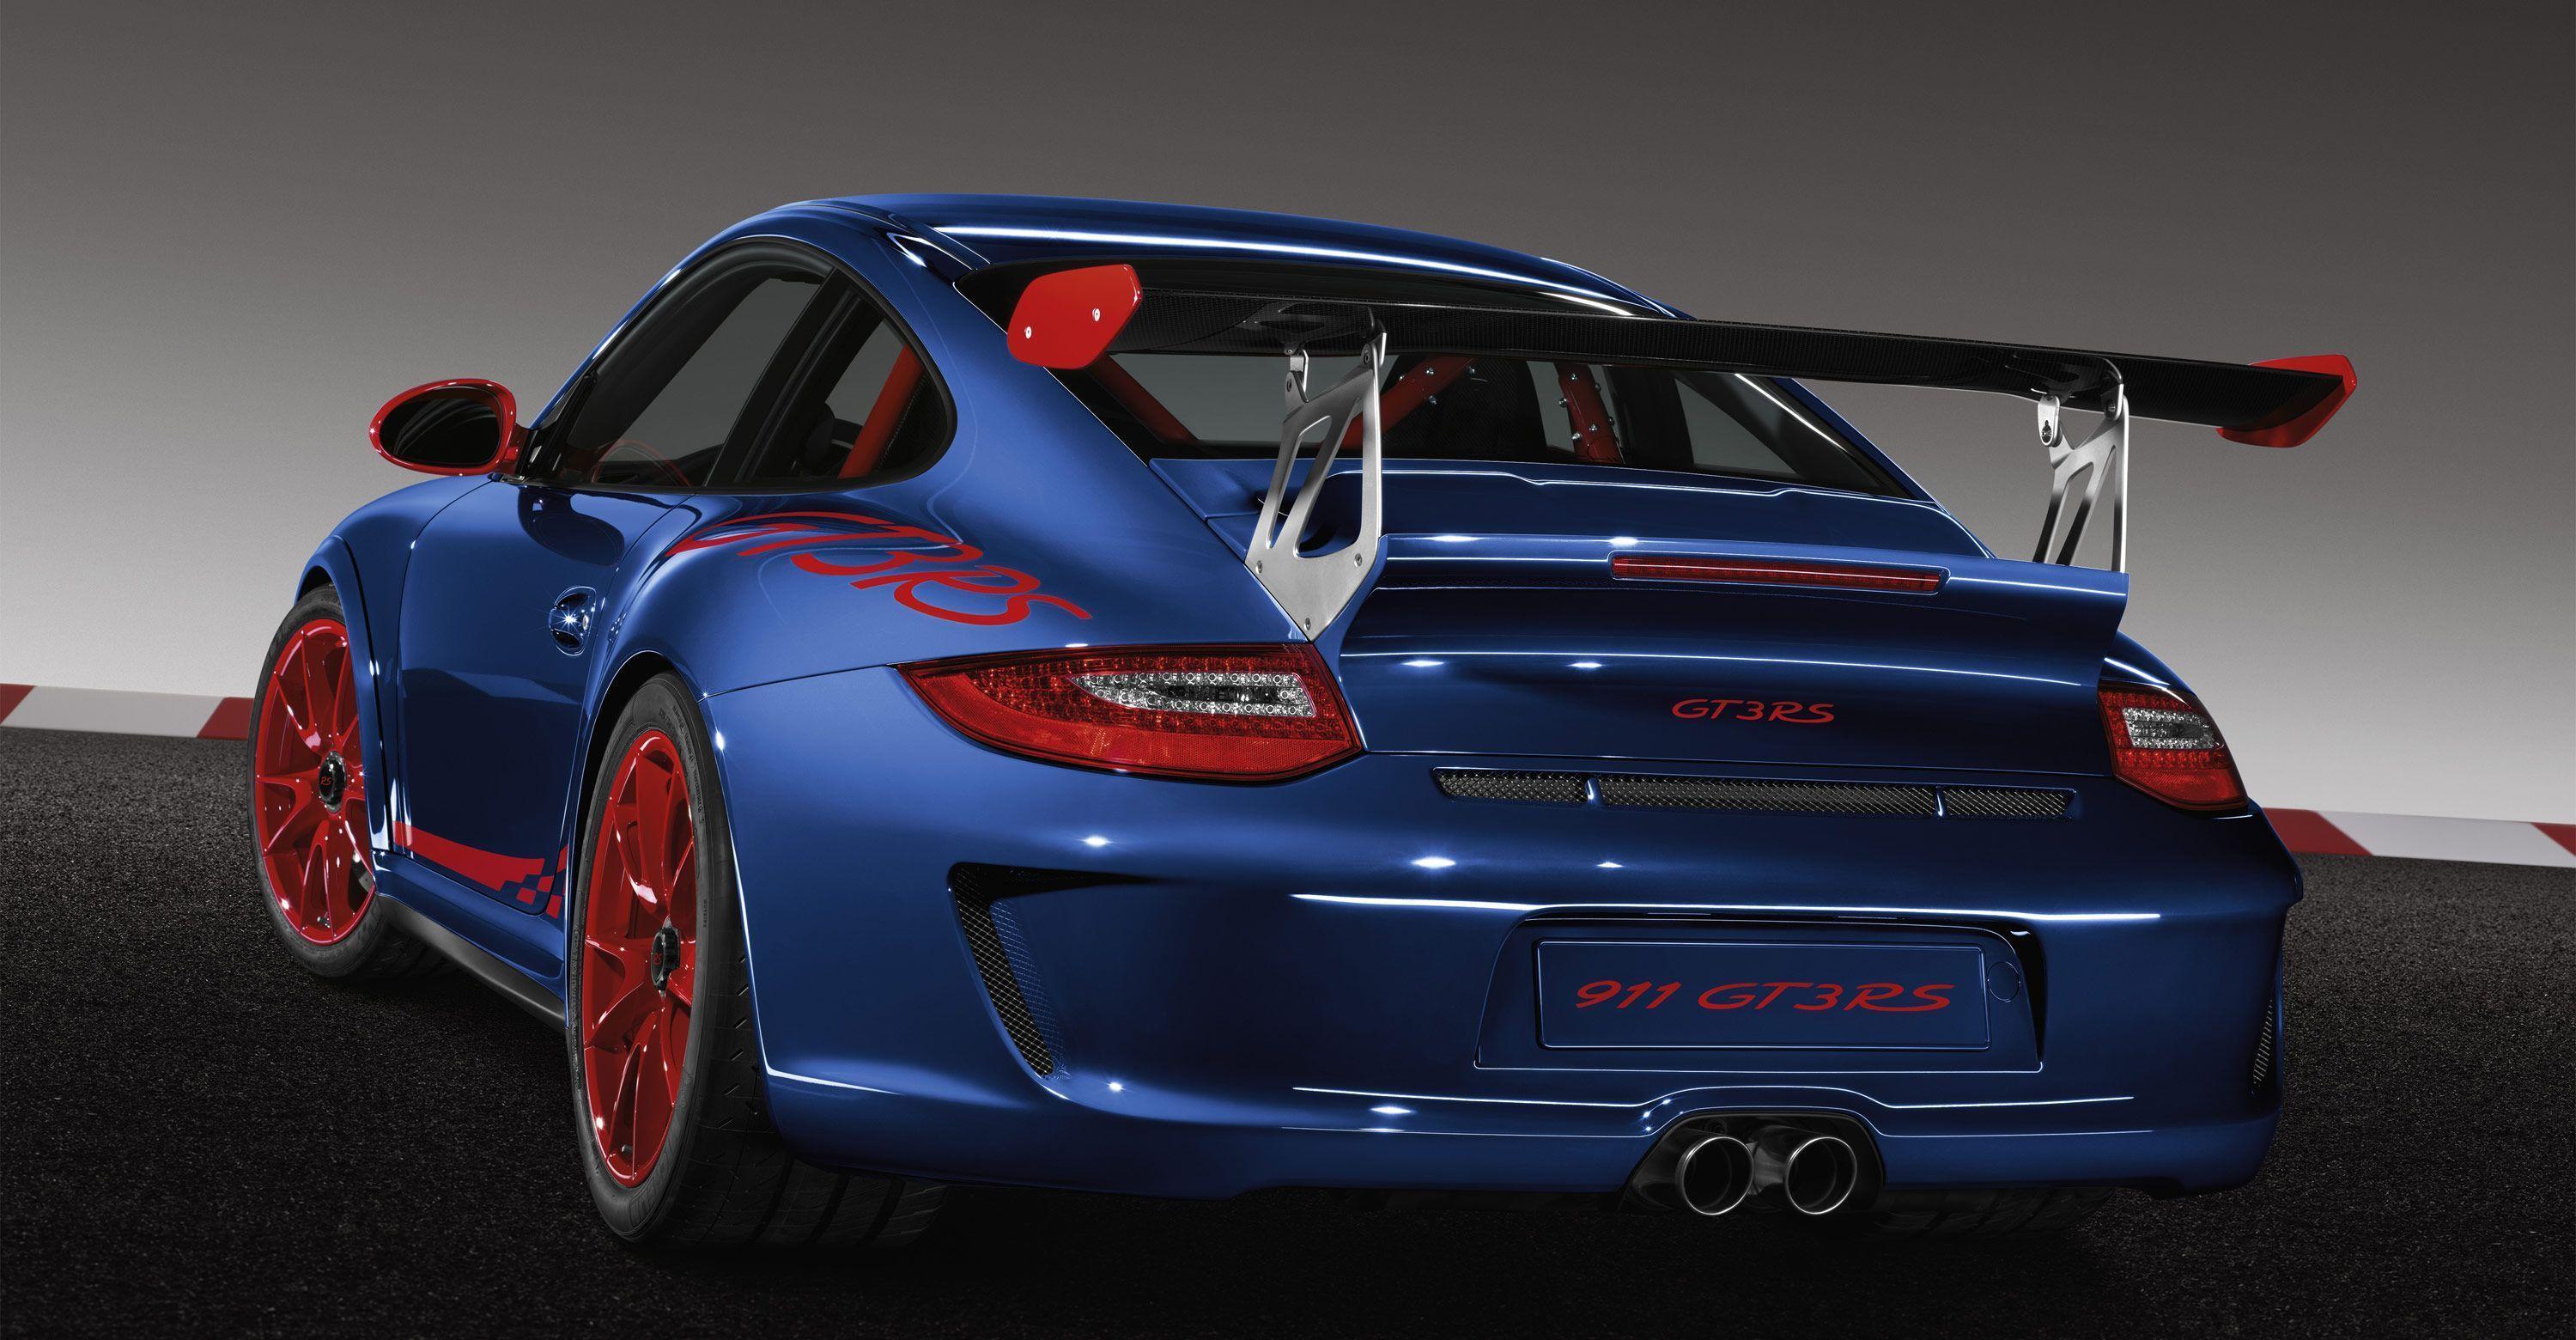 Find Latest 2015 Porsche Gt3 Rs Reviews and New Release Date